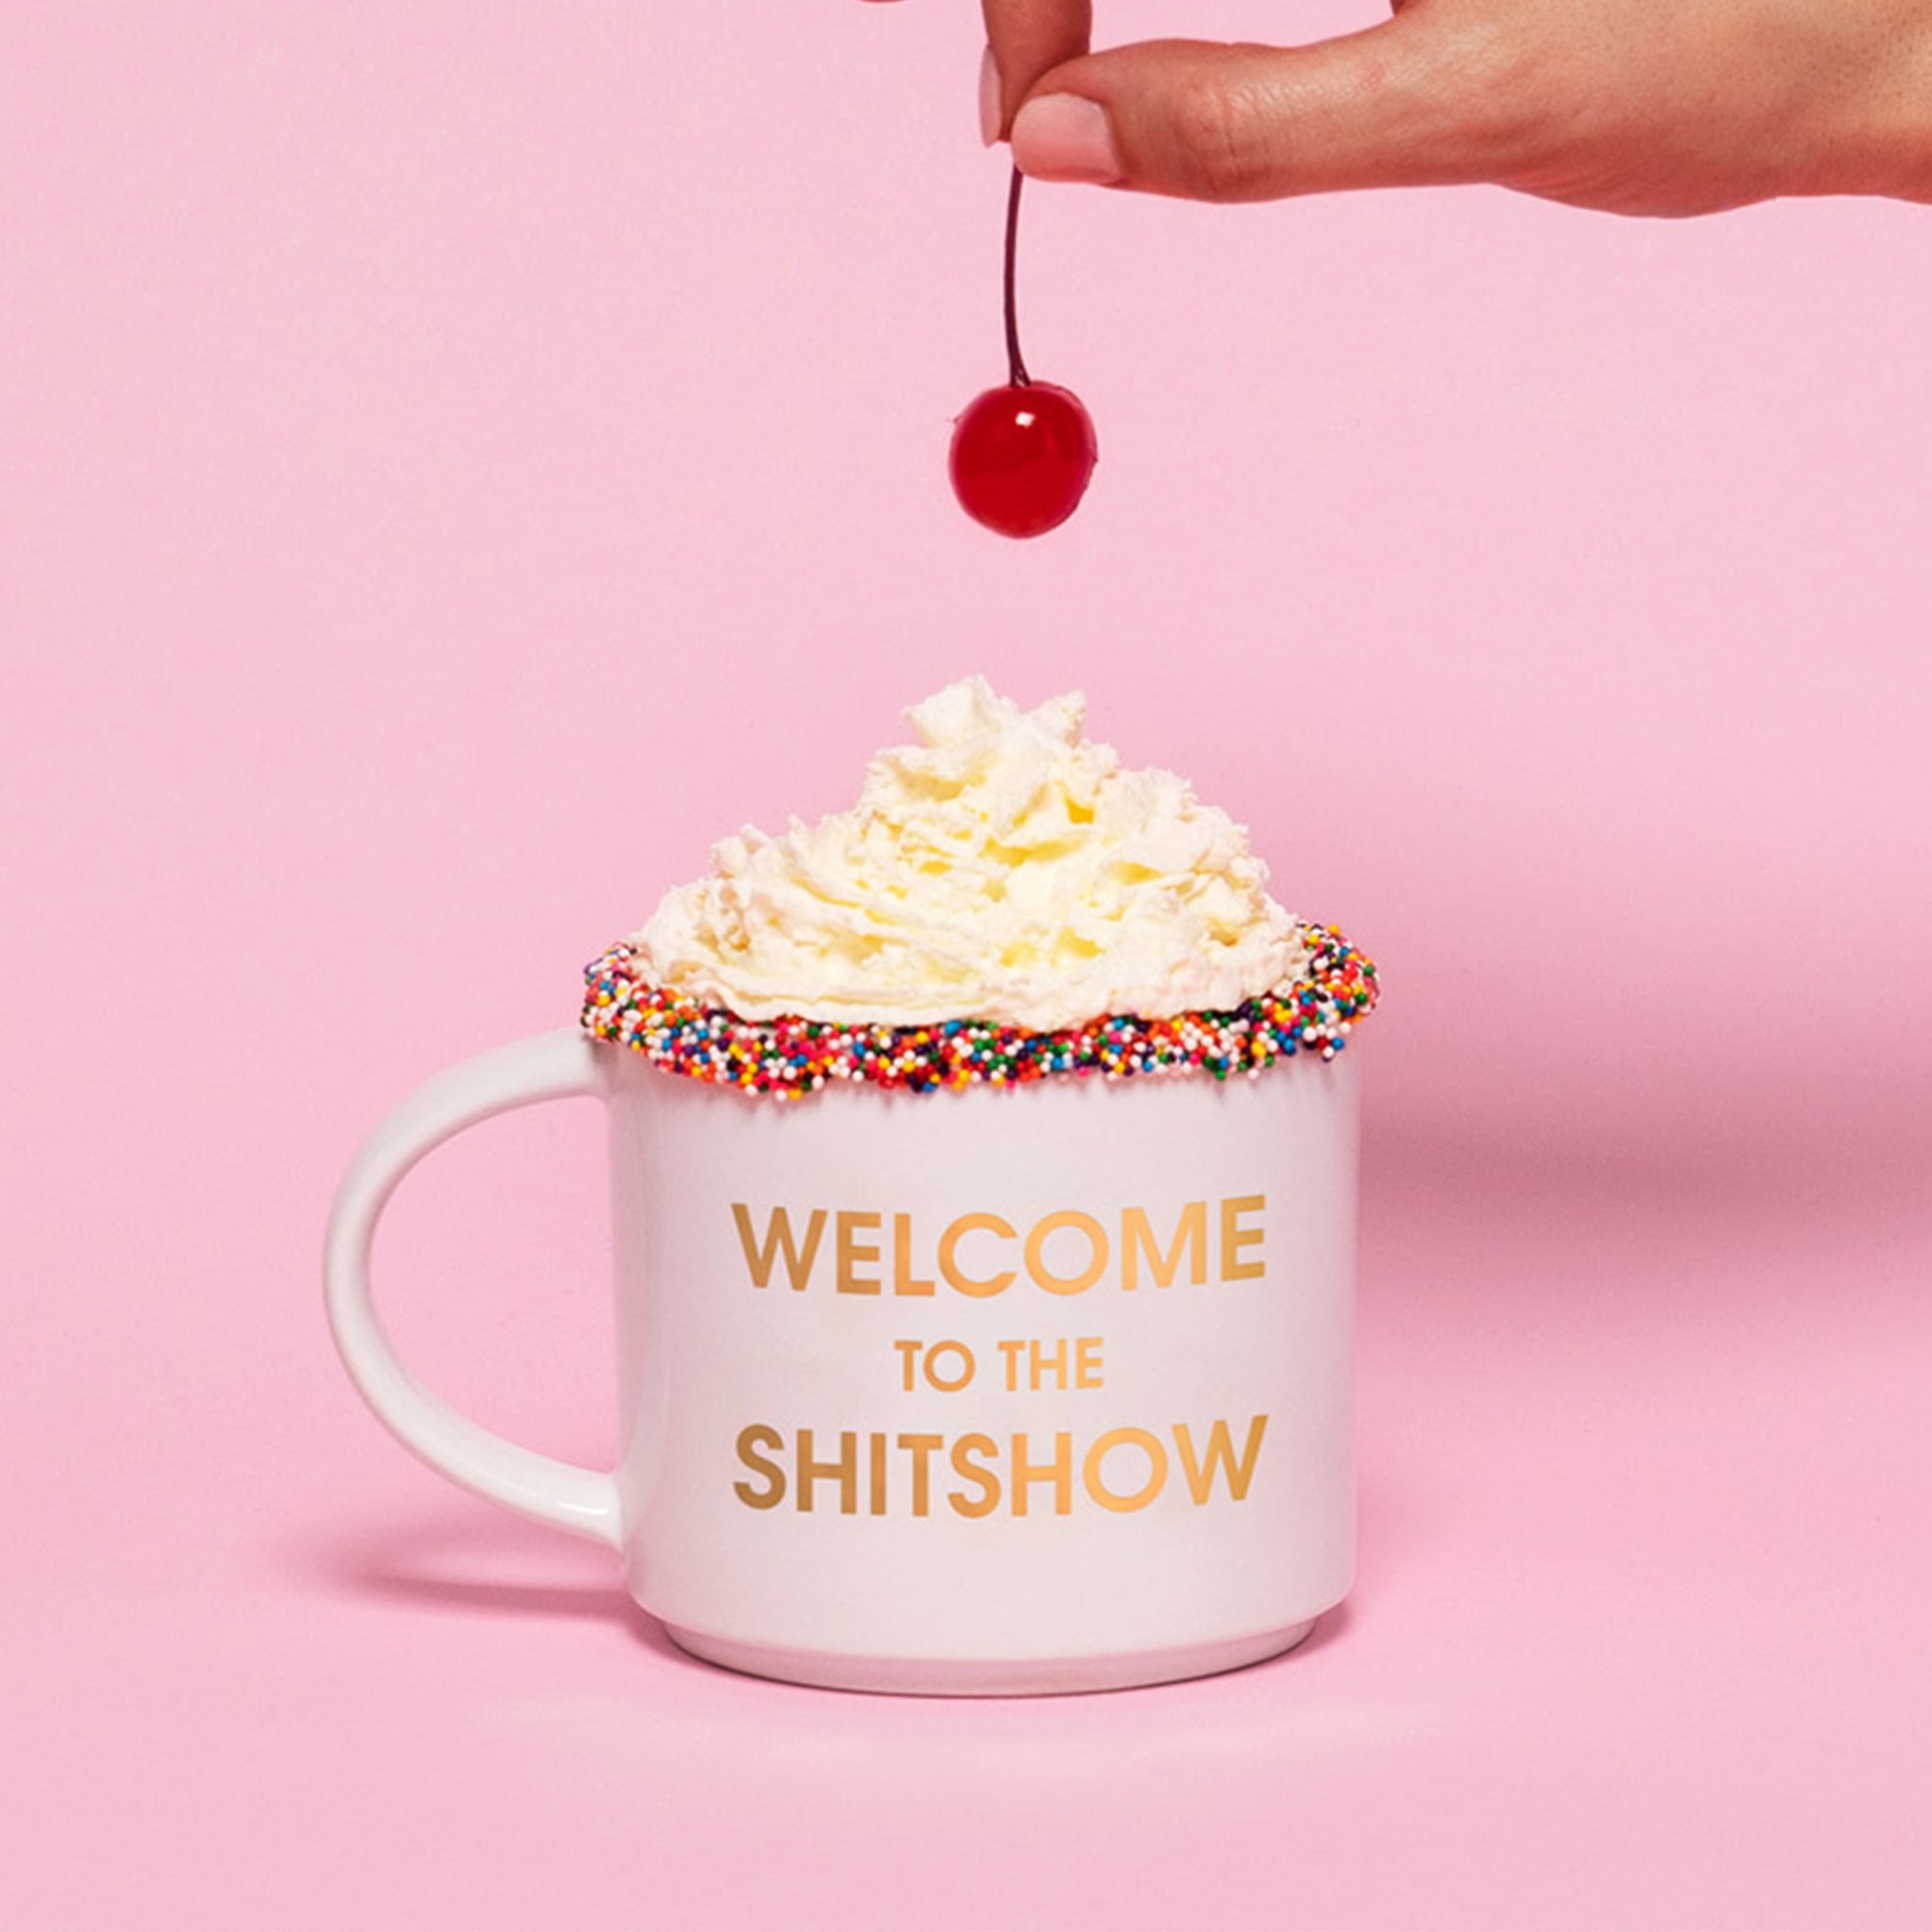 Classic white ceramic mug with a thin round handle labeled &#39;Welcome to the Shitshow&#39; in reflective gold lettering.